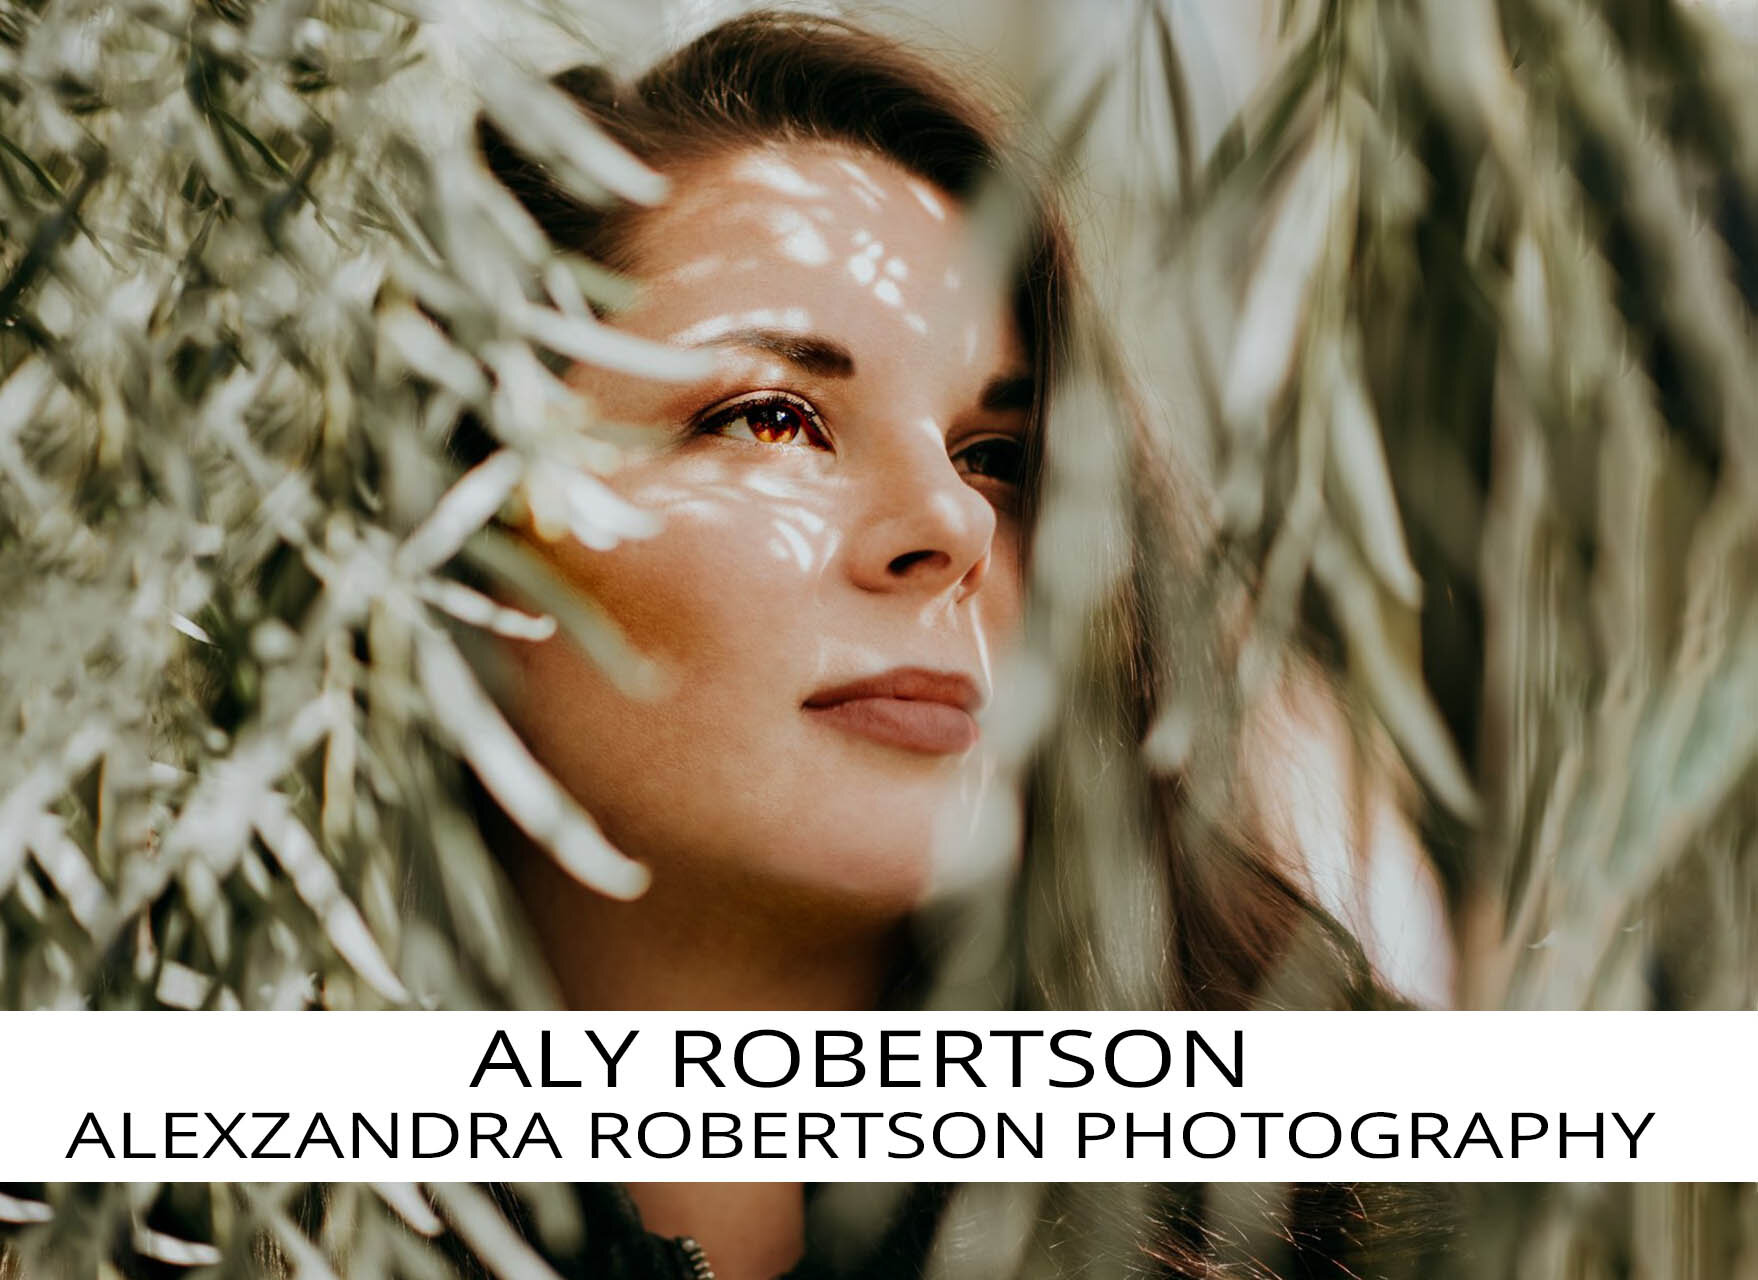 Aly-robertson-twisted-oaks-preset-feature.jpg